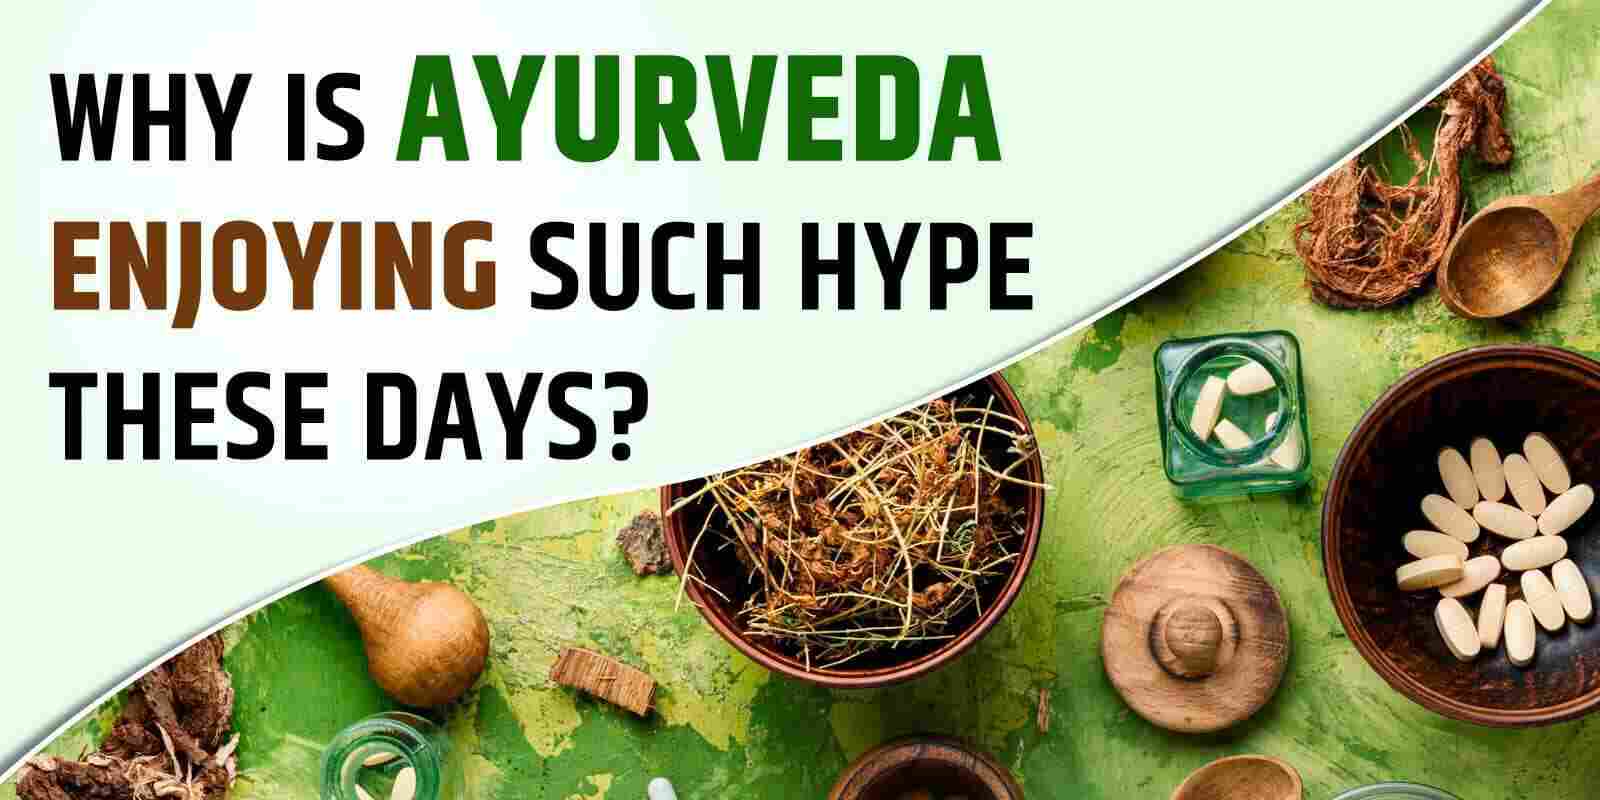 Why Is Ayurveda Enjoying Such Hype These Days?